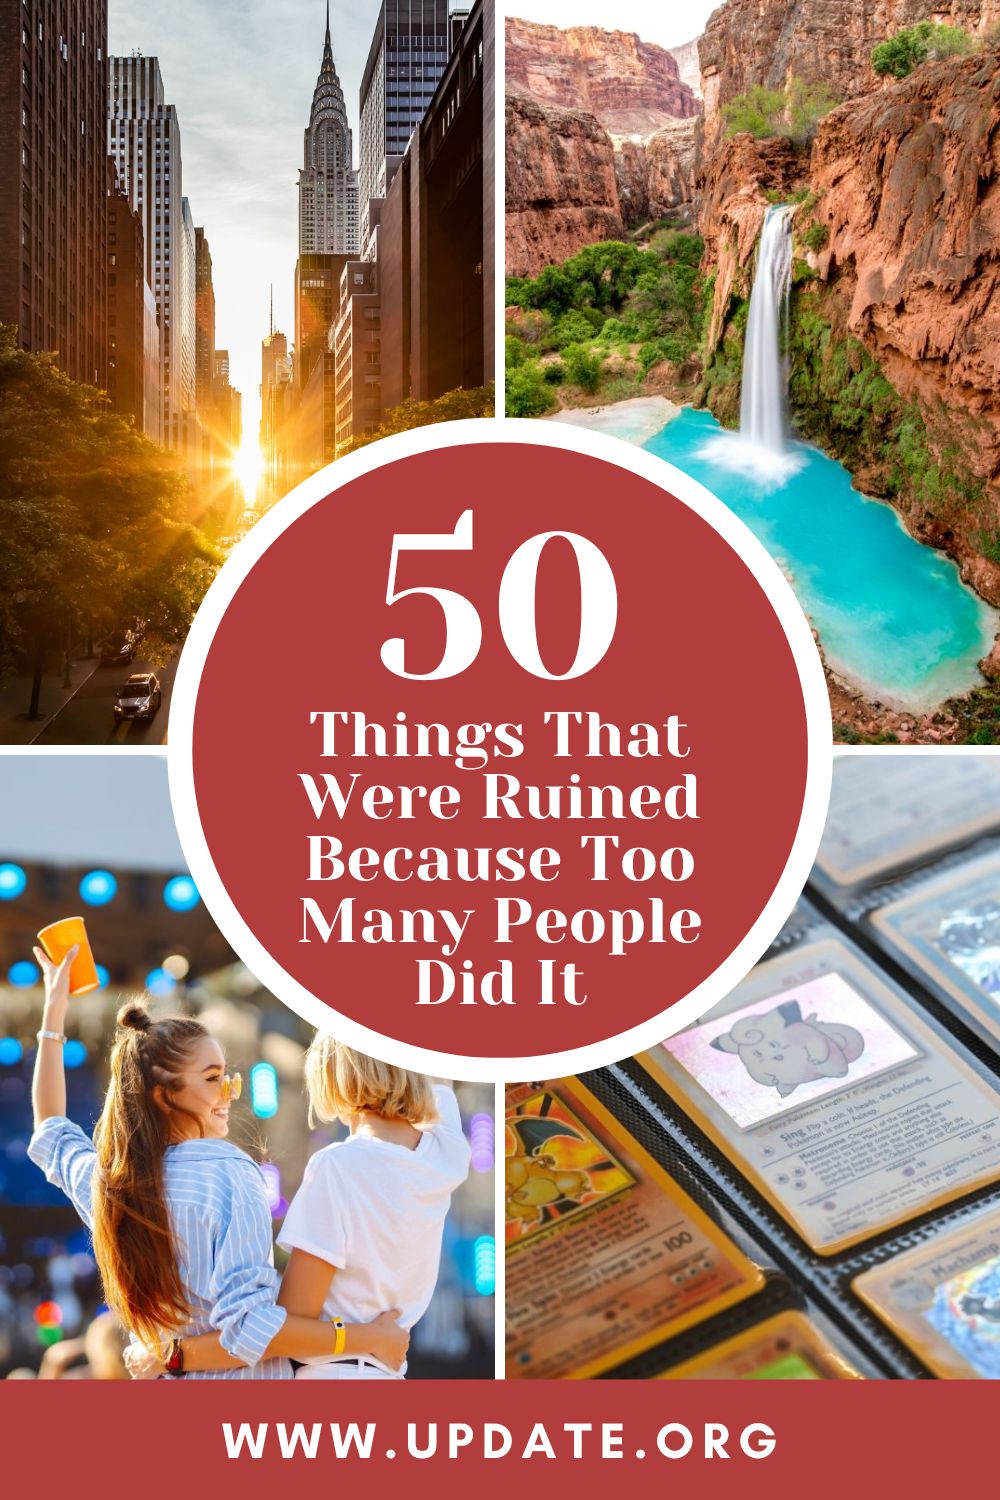 50 Things That Were Ruined Because Too Many People Did It pinterest image.